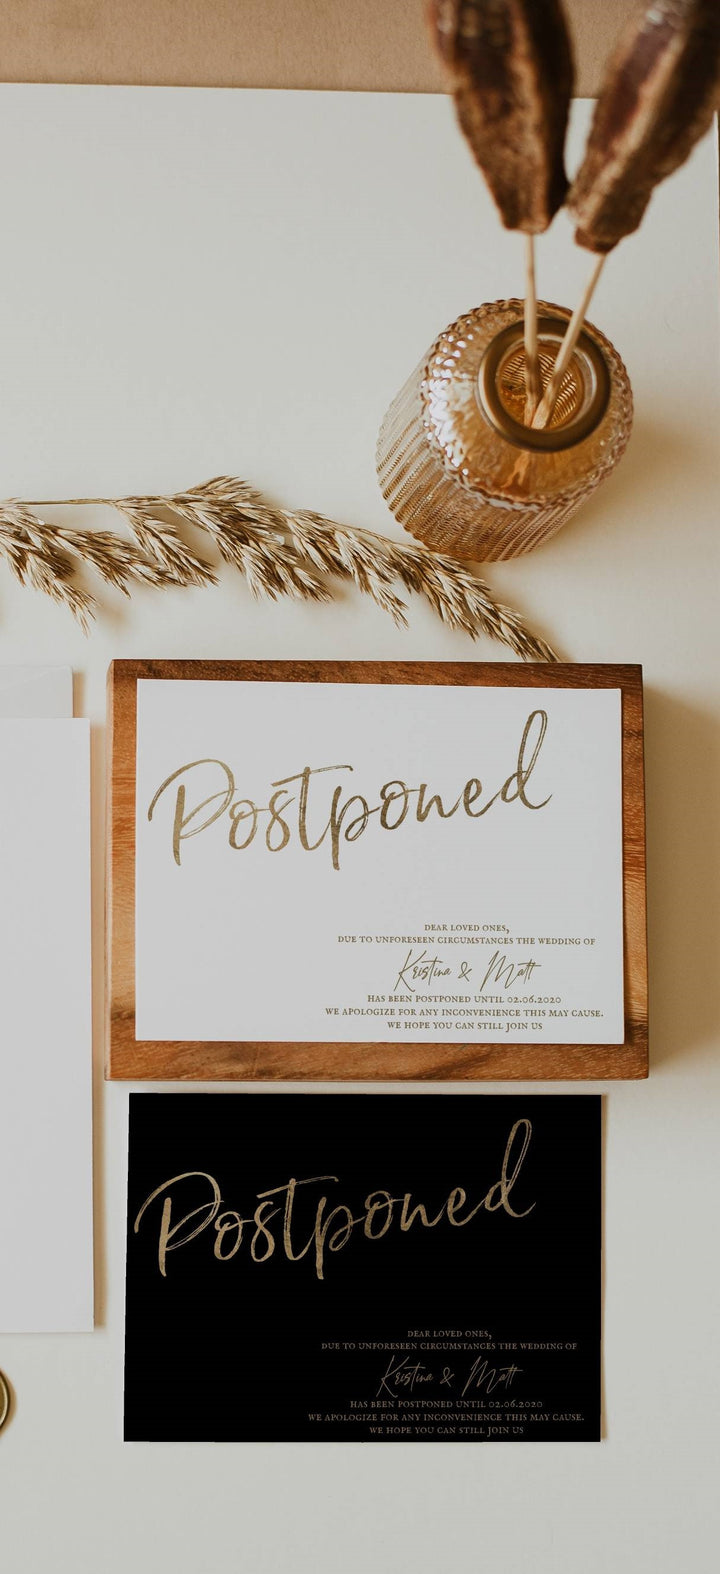 Postponed Wedding Announcement - Gold Foil Change the Date Wedding Card - Black and Gold Postponed Announcement - White and Gold Wedding